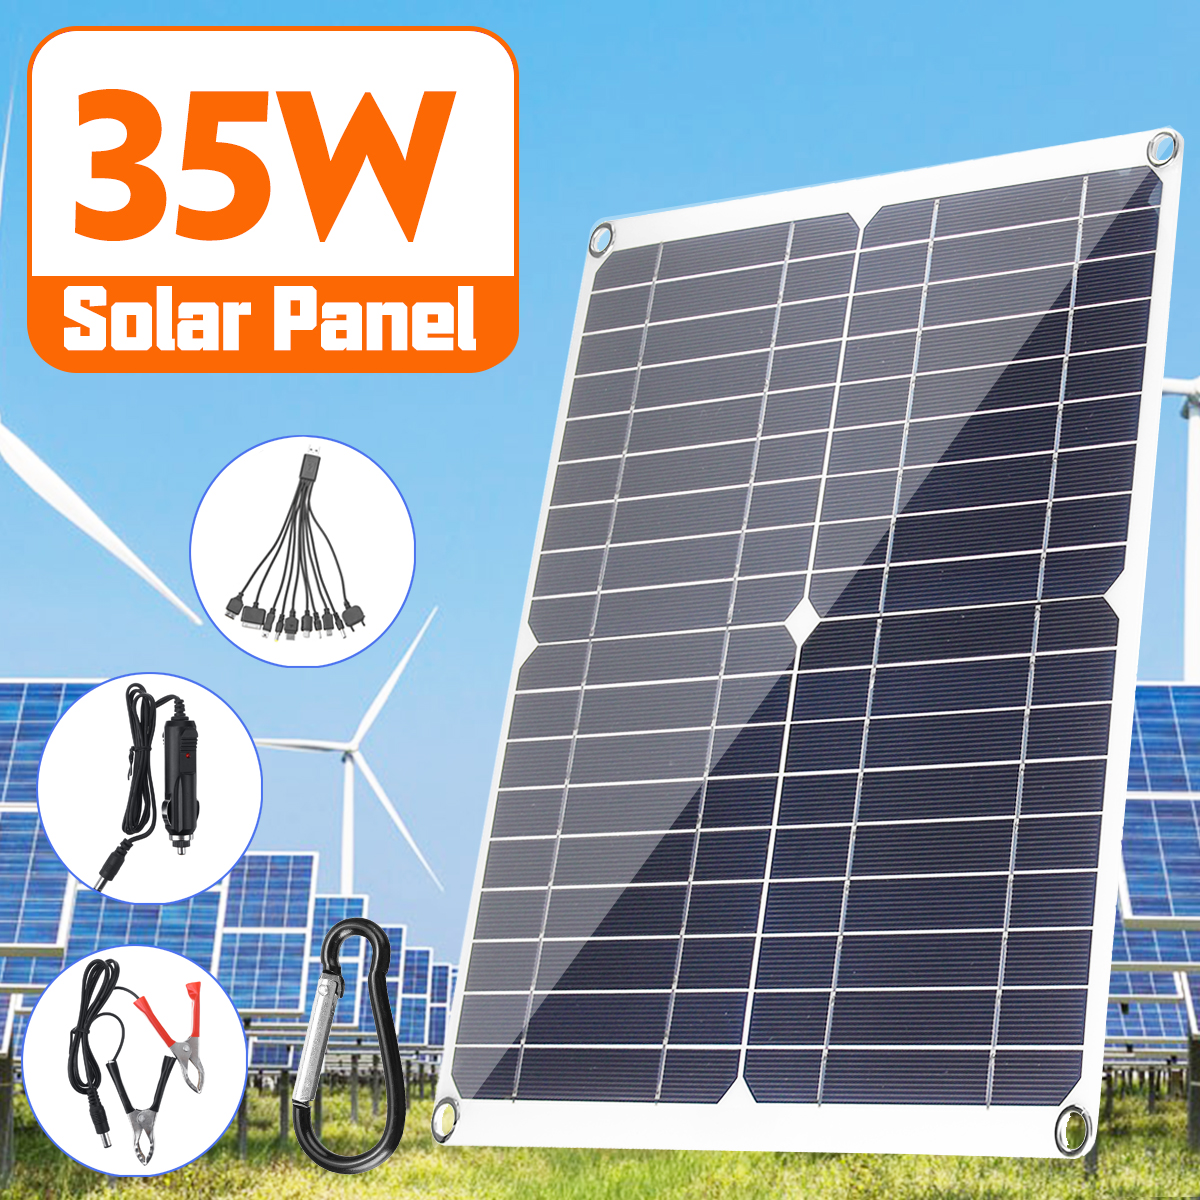 35W-Portable-IP65-Monocrystalline-Solar-Panel-Double-USB-Port-10-in-1-Charging-Cable-1570261-1